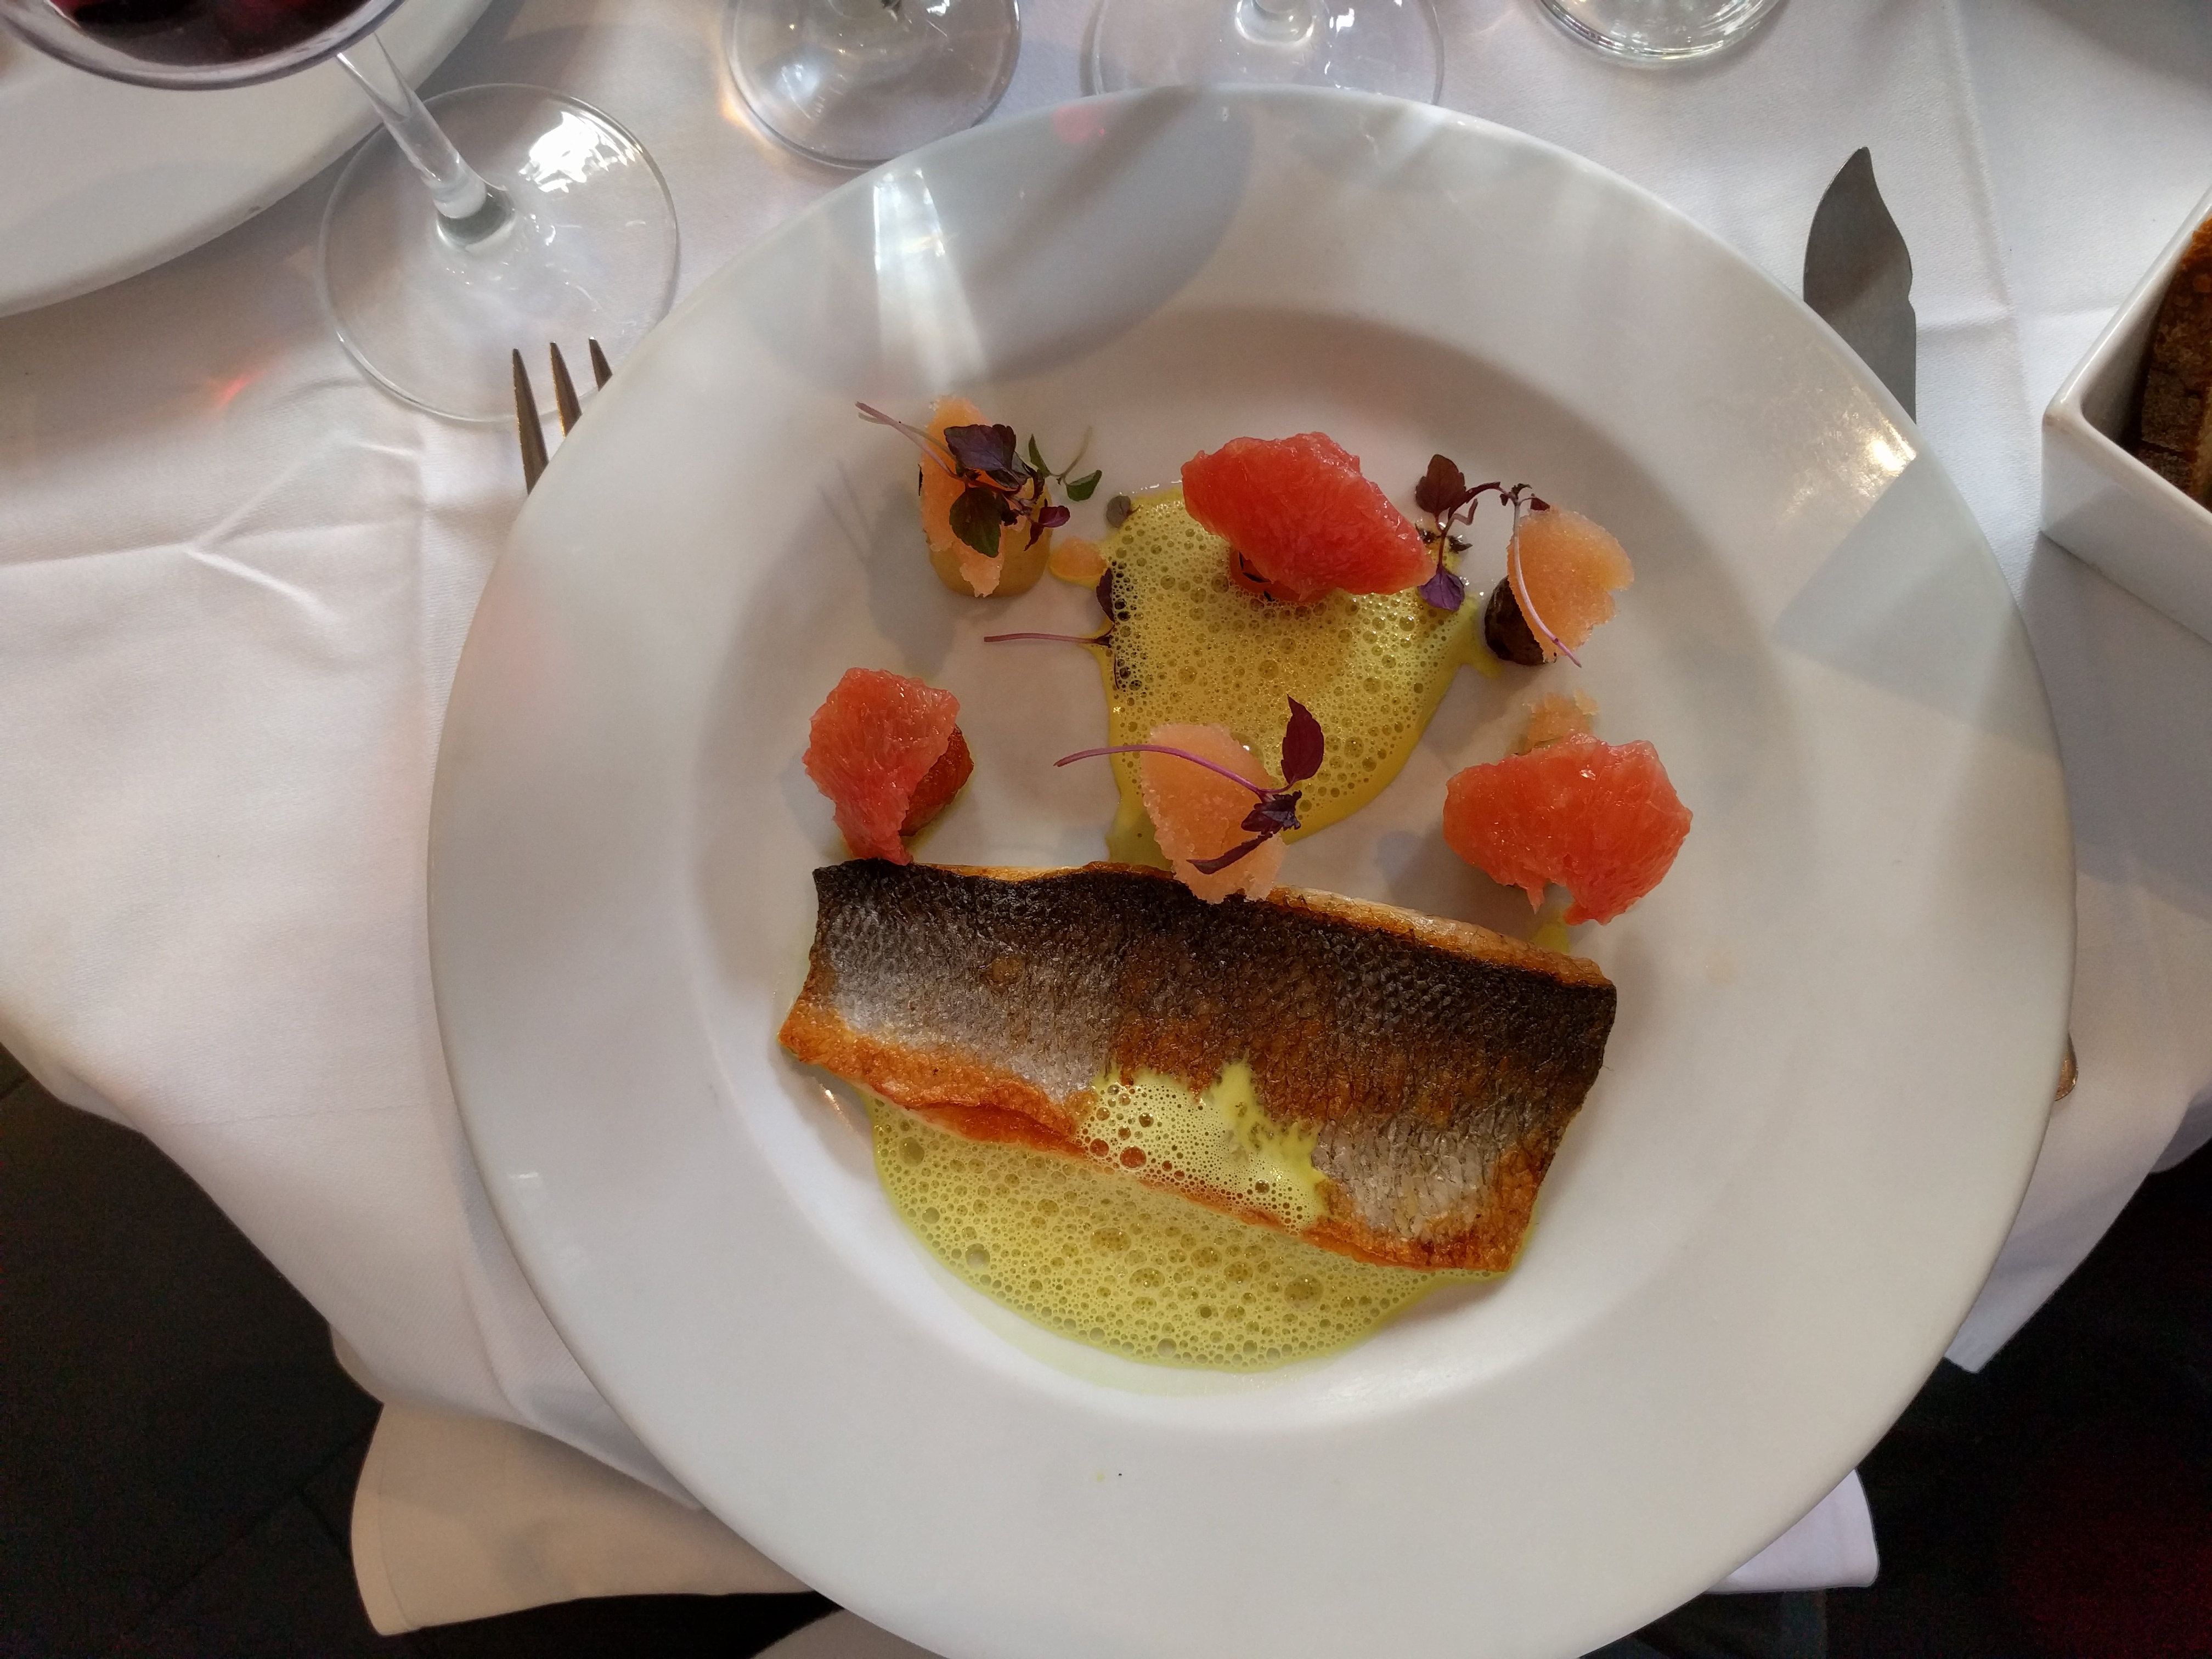 A main course of sea bass with carrots and grapefruit